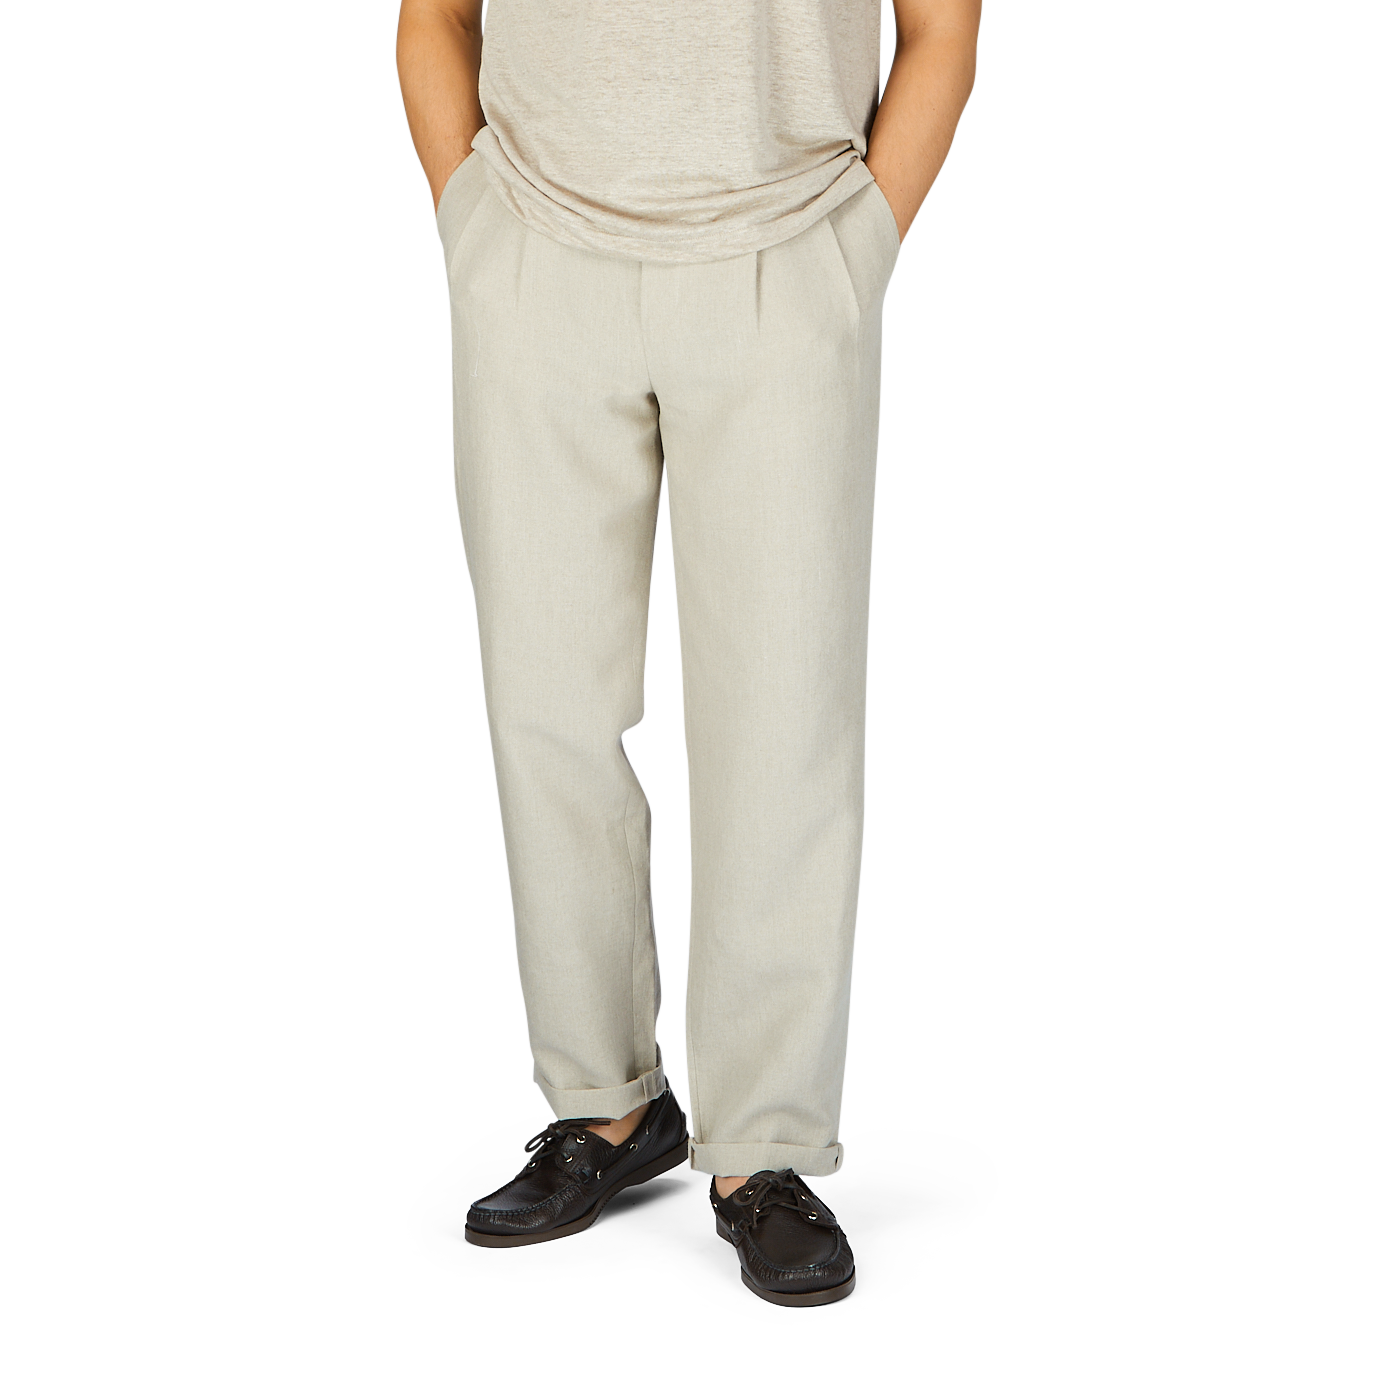 A person wearing De Bonne Facture's Oatmeal Beige Linen Pleated Trousers and brown leather shoes stands with hands in pockets against a plain background.